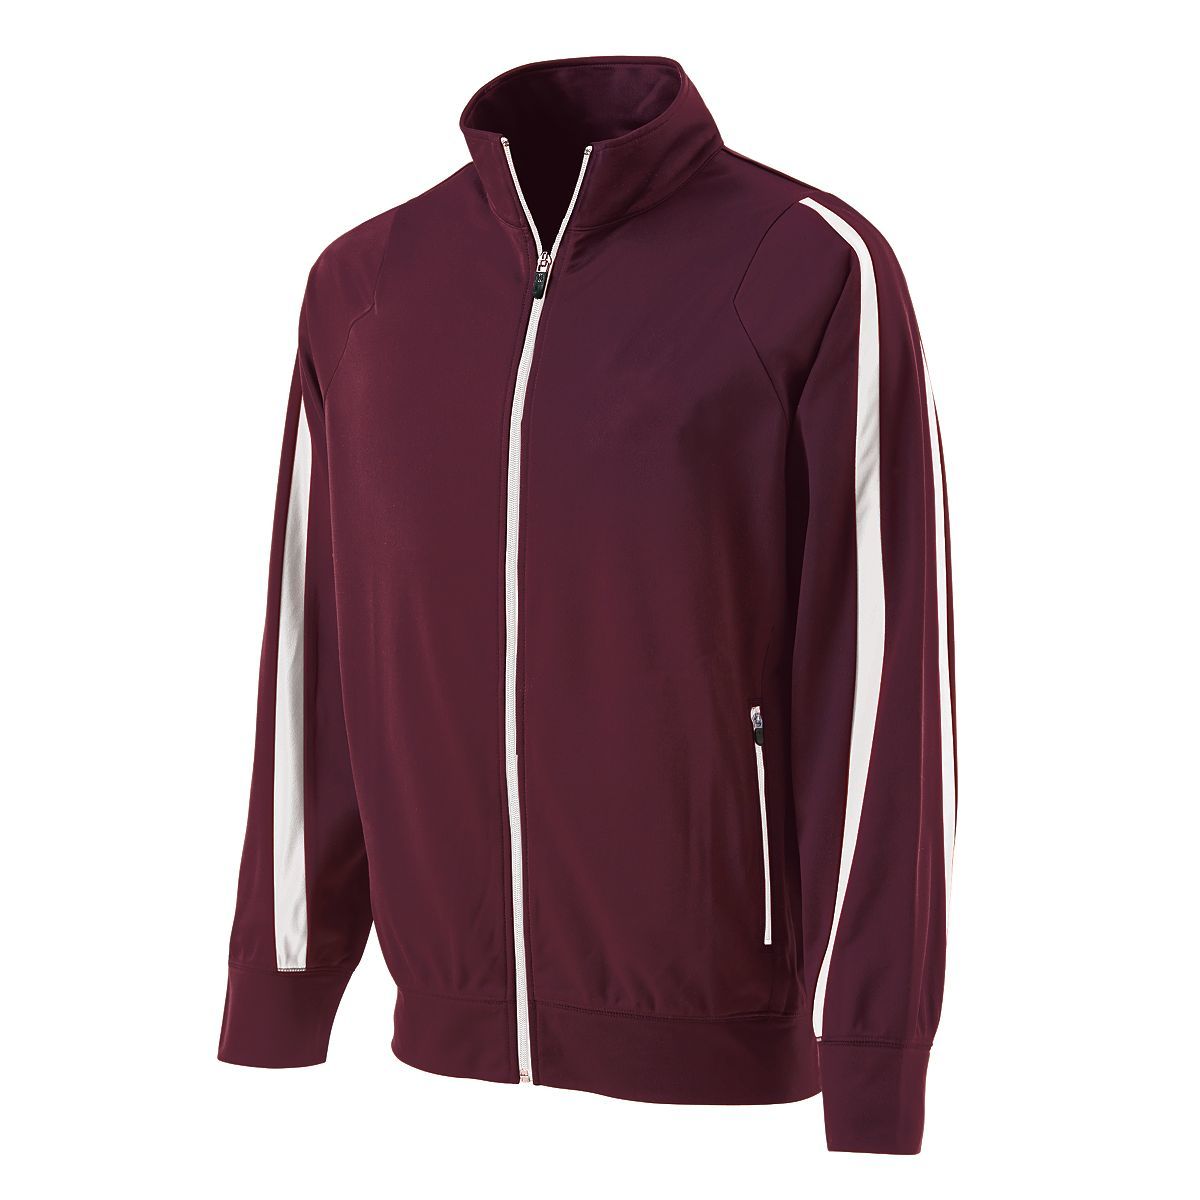 Holloway Youth Determination Jacket in Maroon/White  -Part of the Youth, Youth-Jacket, Holloway, Outerwear product lines at KanaleyCreations.com